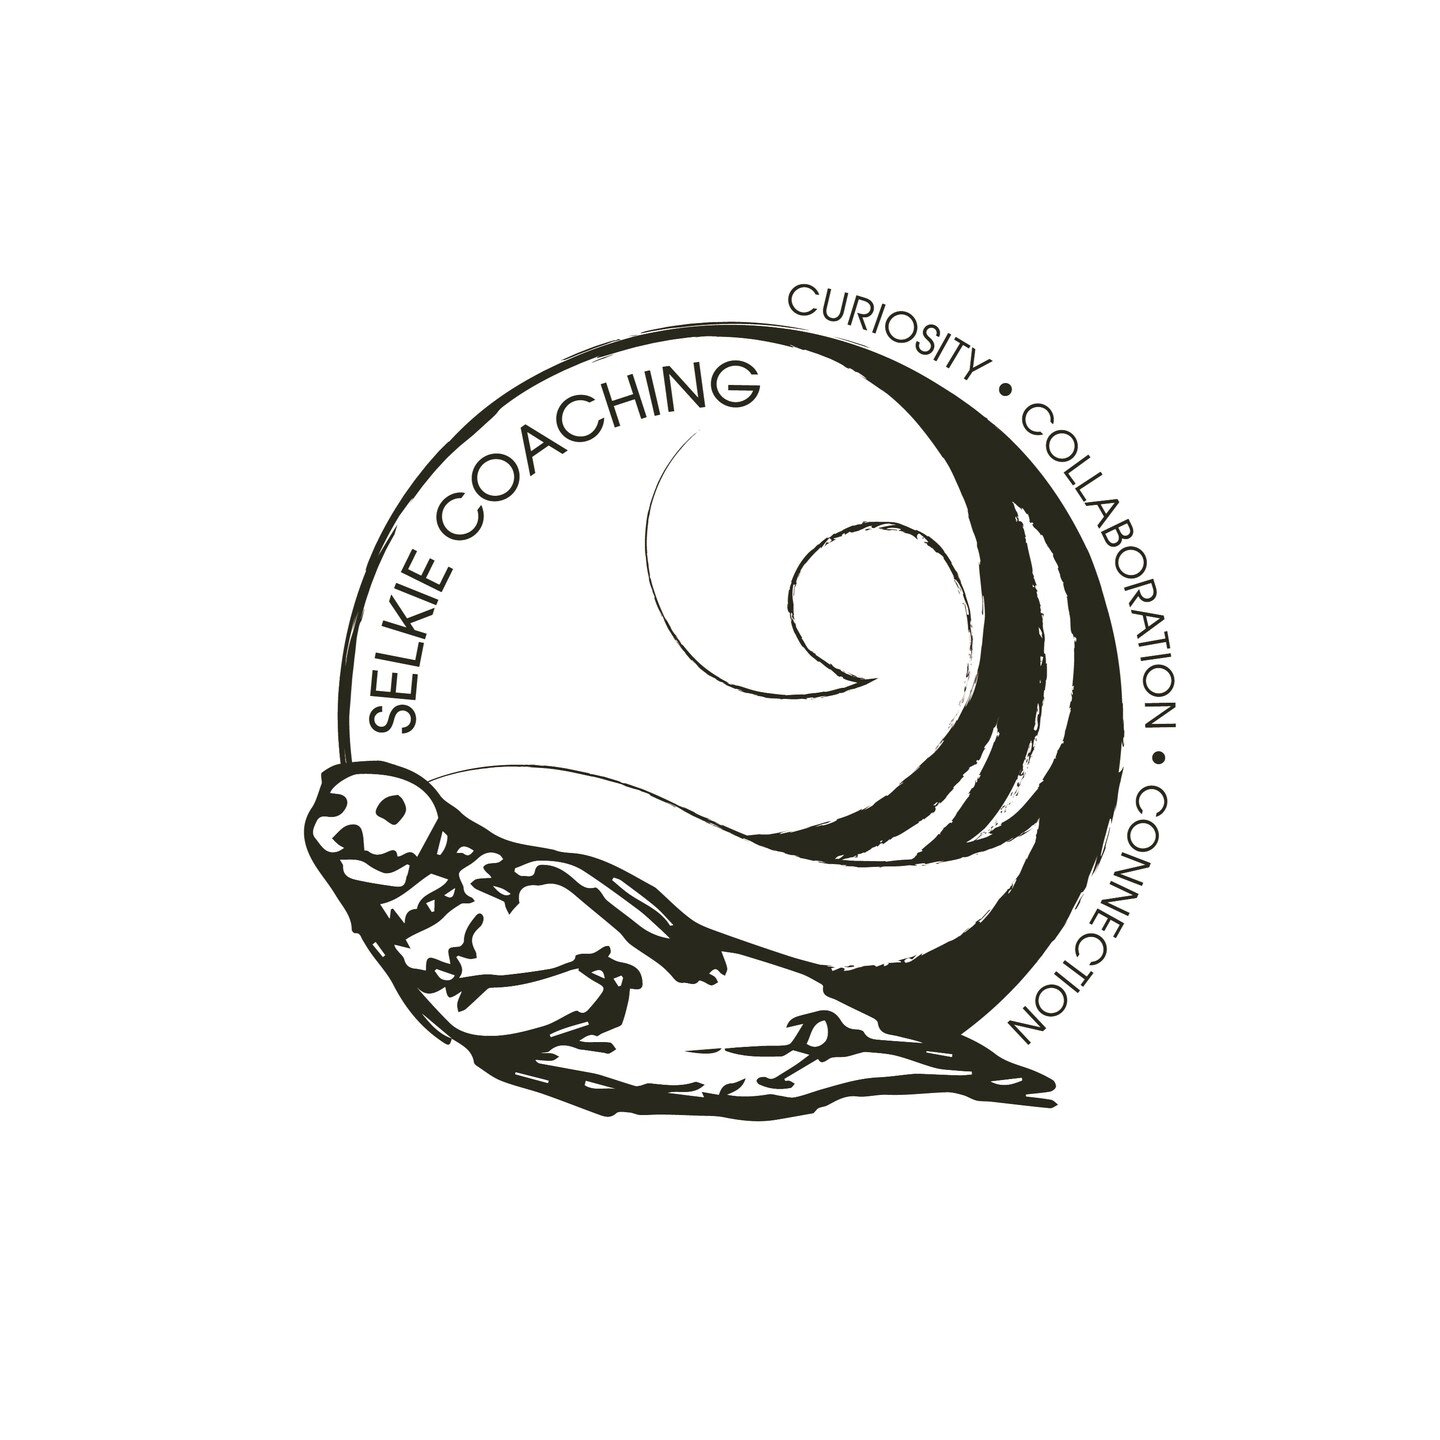 Dearest Community,

I am so excited to announce my latest adventure: Selkie Coaching! 

Twenty years of experience as an educator, bookseller, artist, writer, and member of Olympia's creative community has led me to this moment. I'm starting a busine